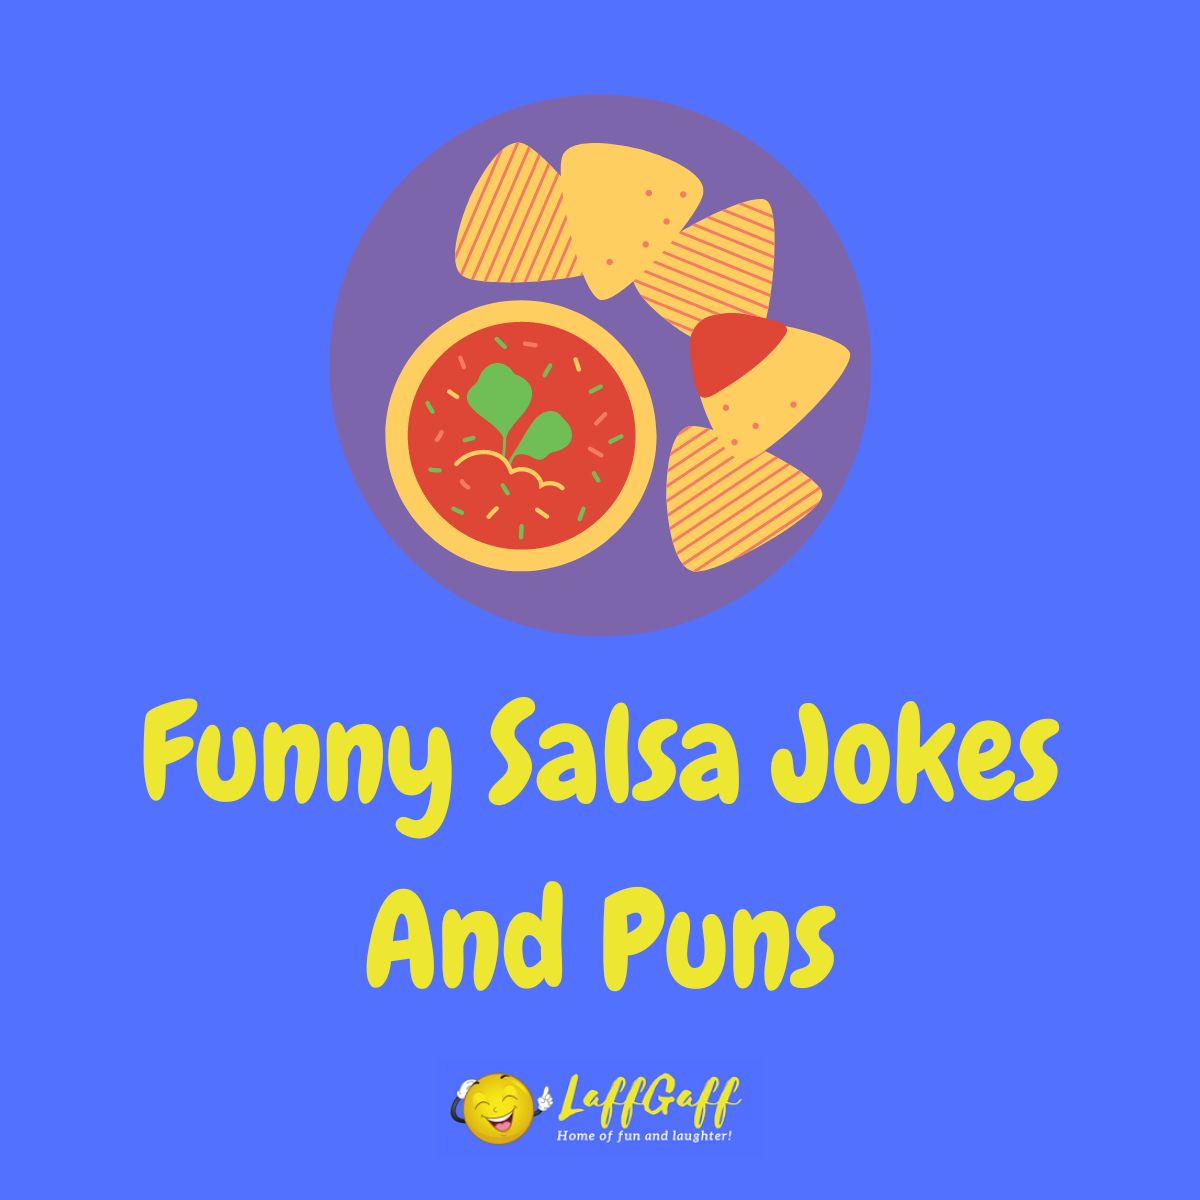 Featured image for a page of salsa jokes and puns.